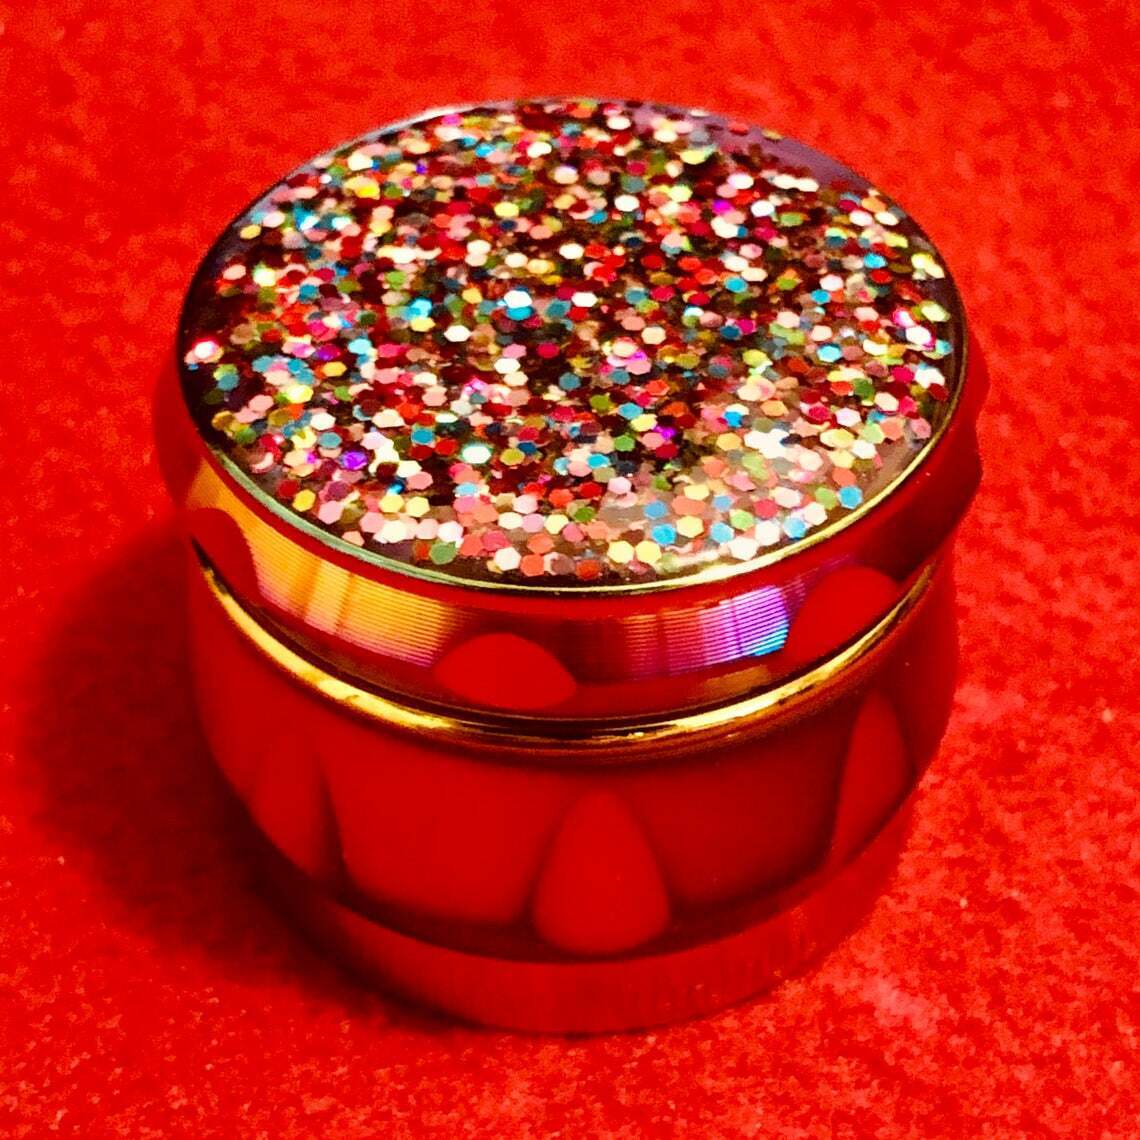 NEW 💫Fantastic look Holographic Glitter Metal Herb Grinder 1.5 Inch 4 Piece 